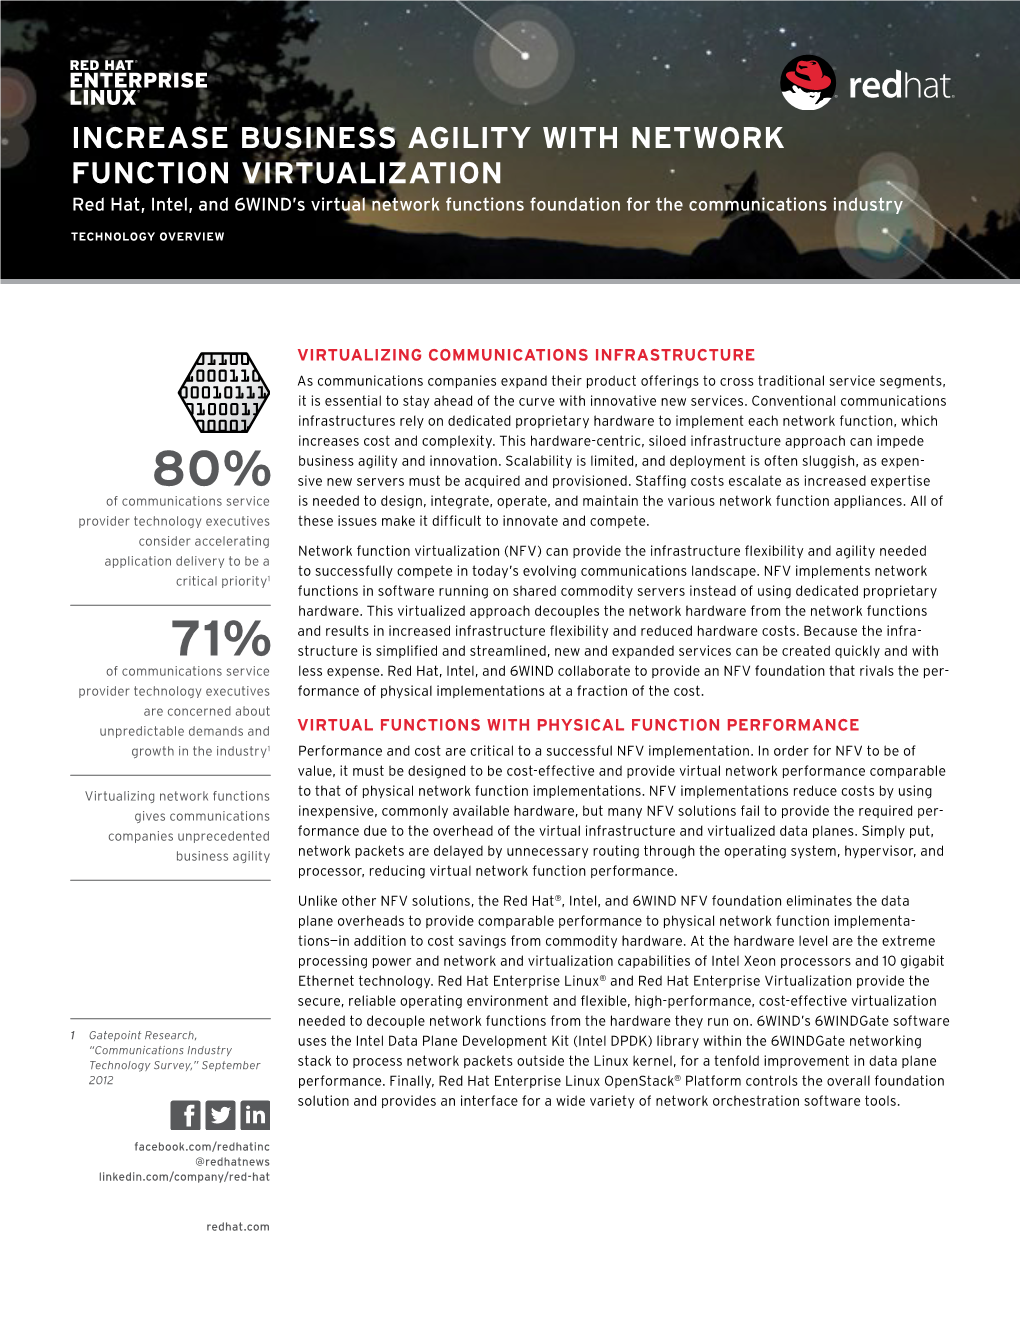 INCREASE BUSINESS AGILITY with NETWORK FUNCTION VIRTUALIZATION Red Hat, Intel, and 6WIND’S Virtual Network Functions Foundation for the Communications Industry